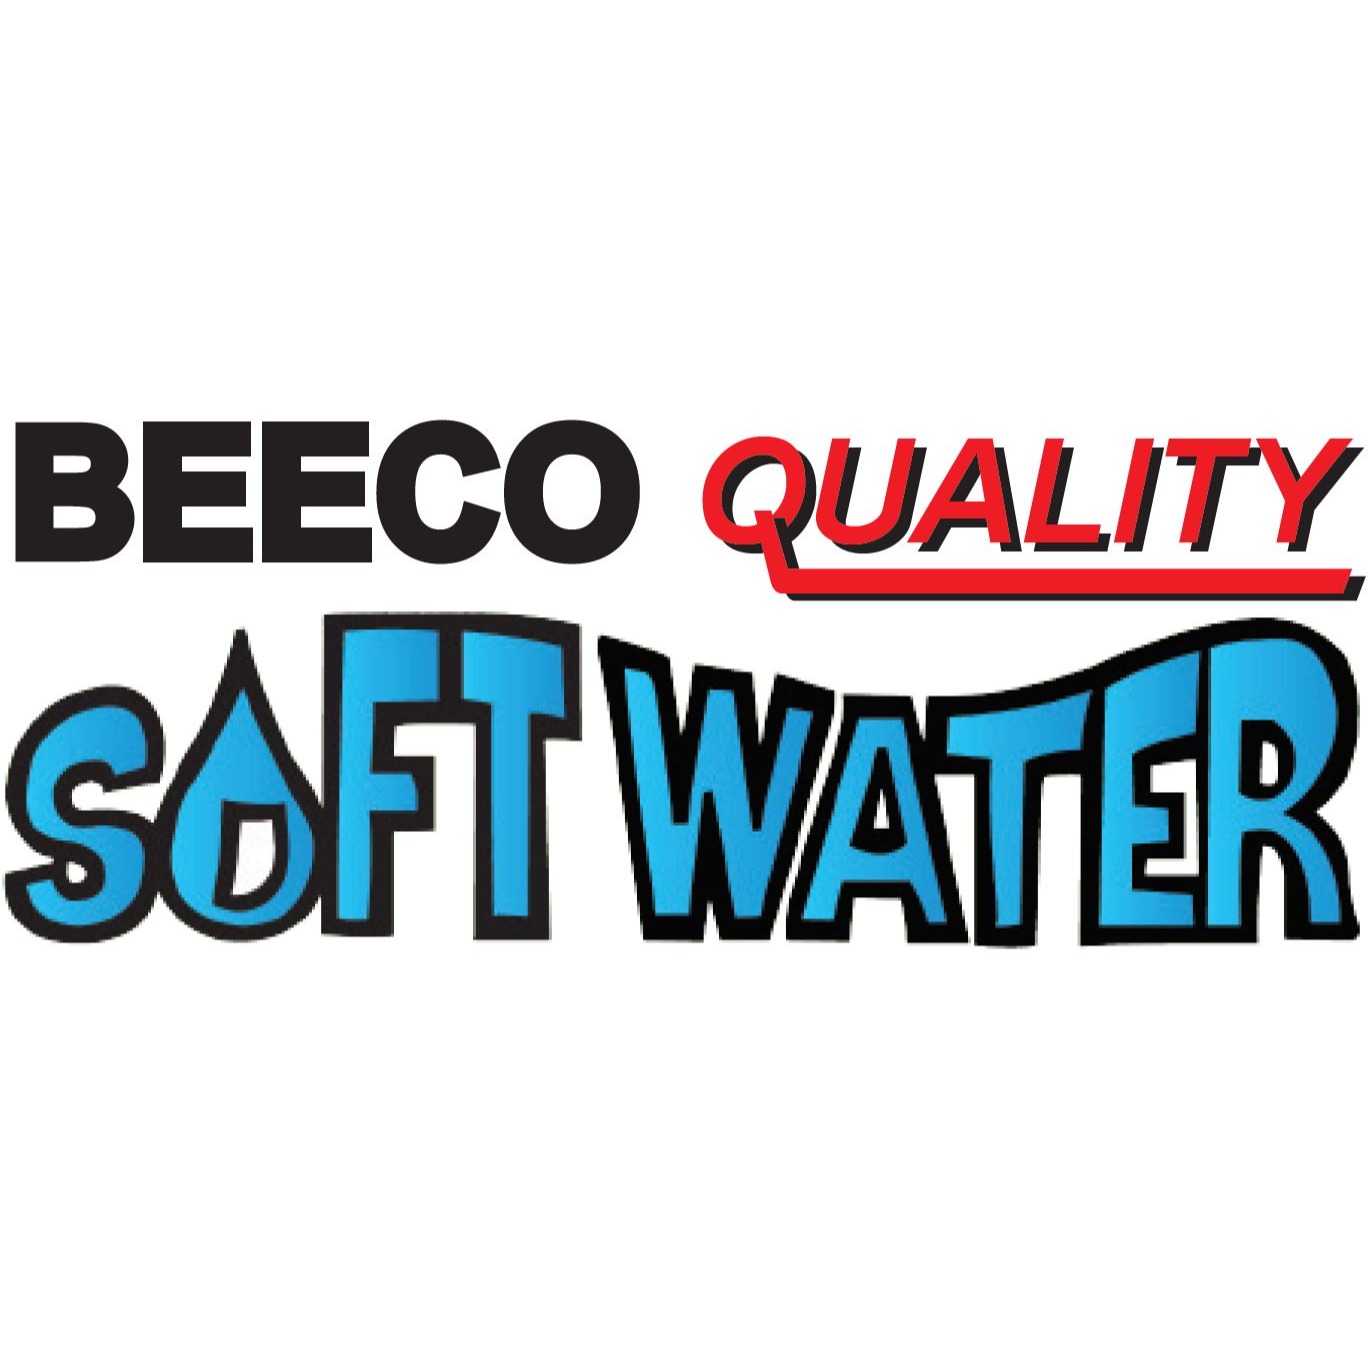 Beeco Softwater 275 Huls Dr, Clayton Ohio 45315